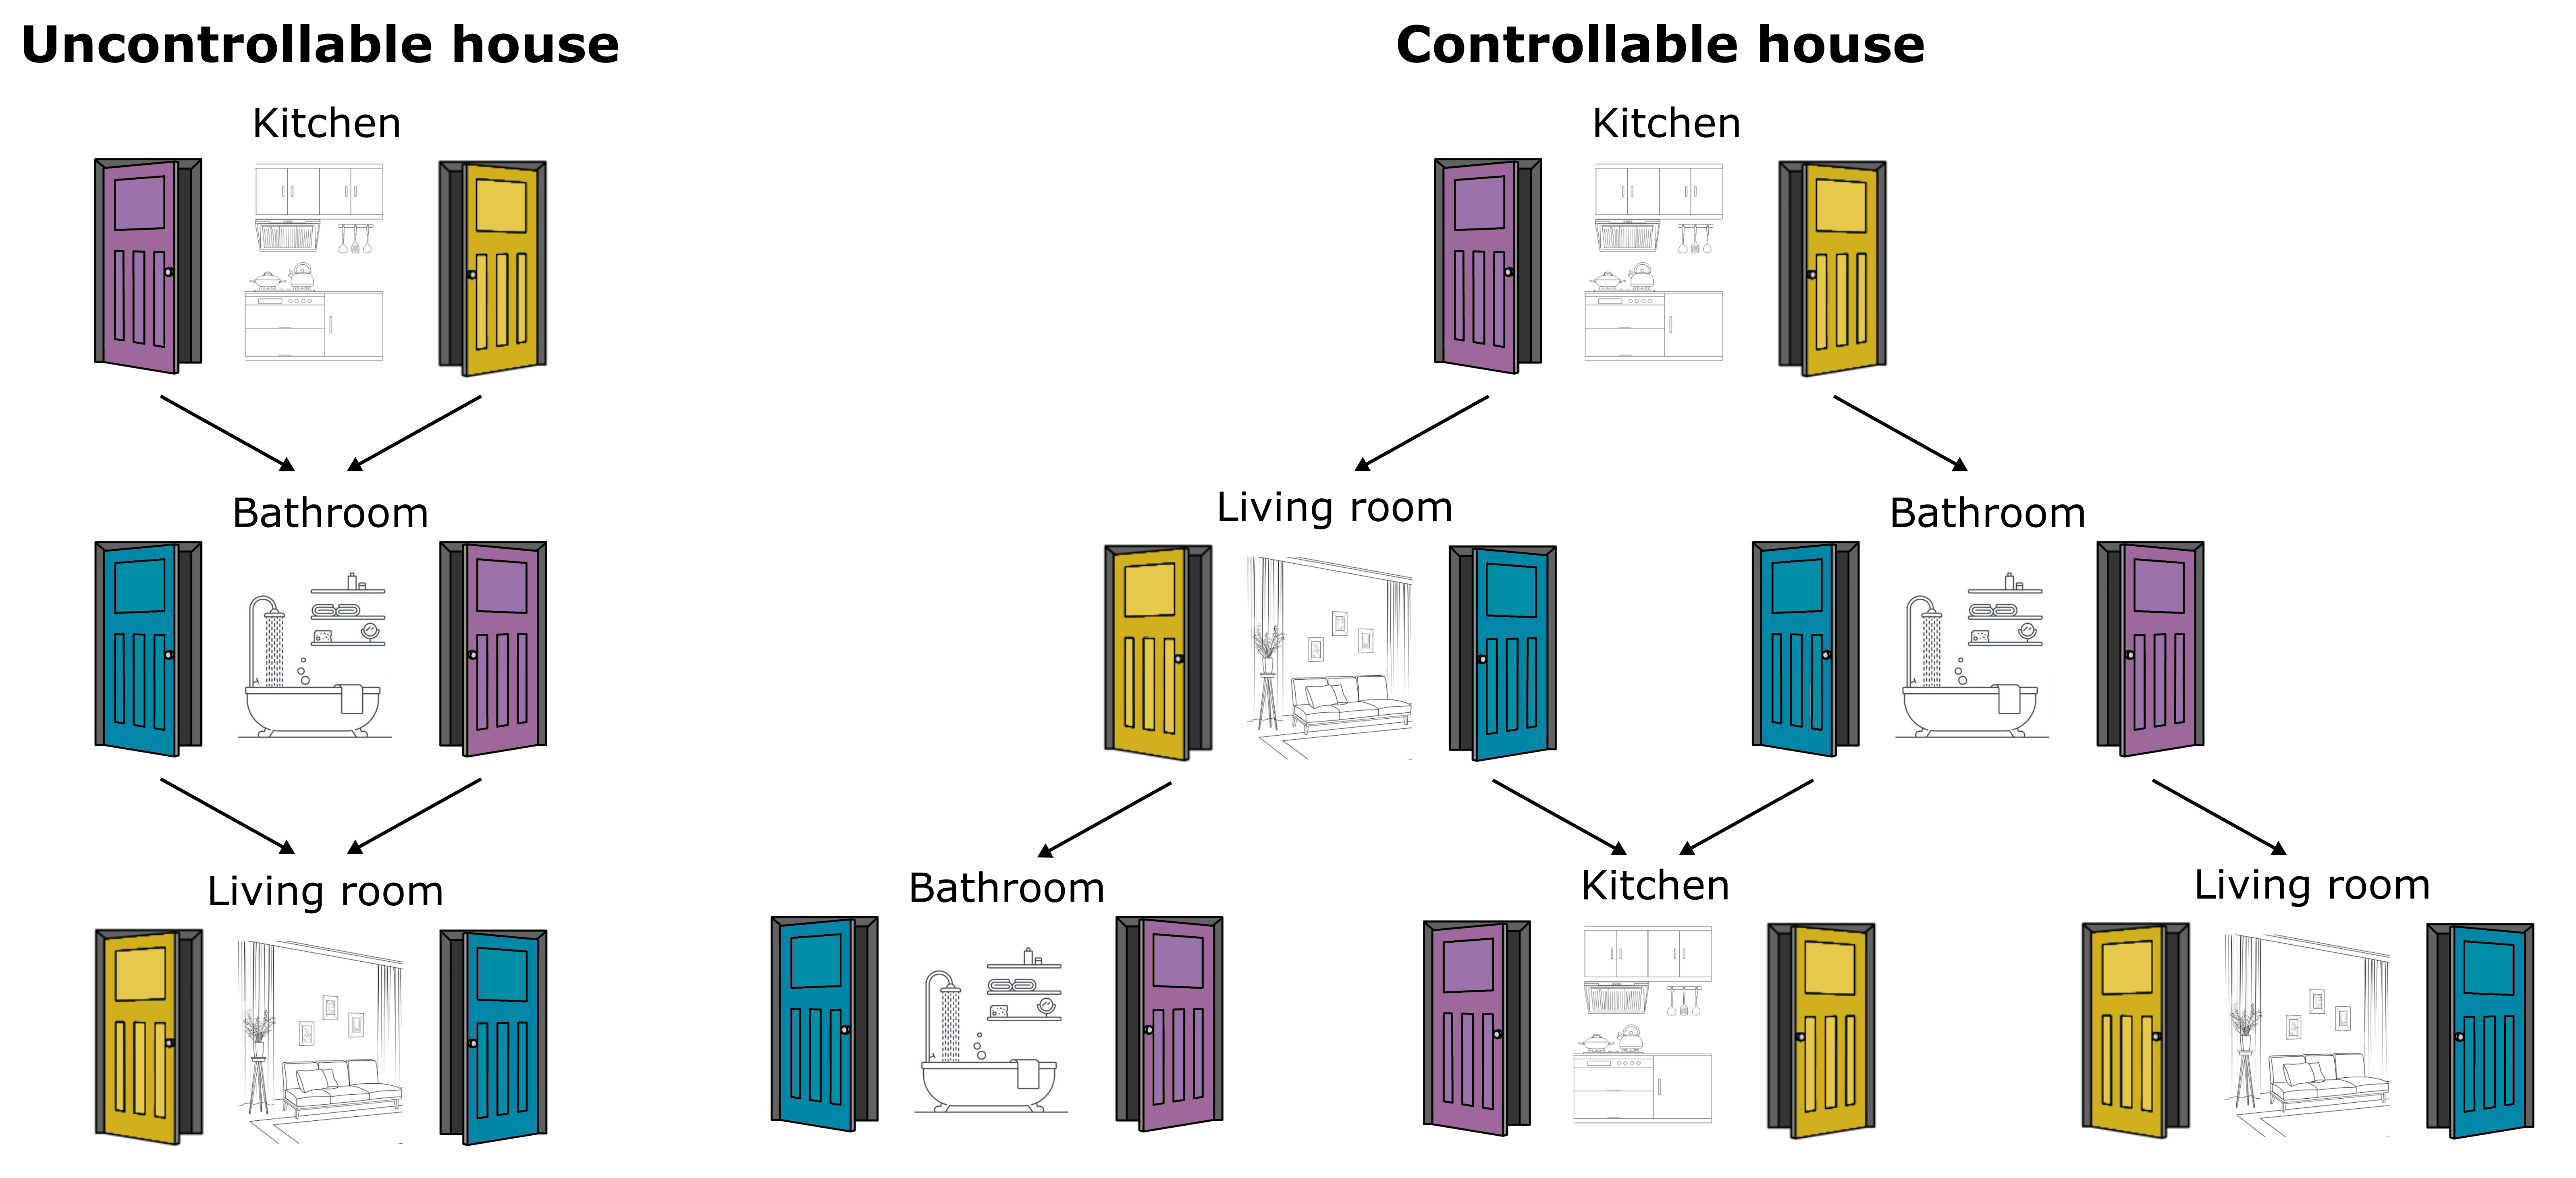 Controllable and Incontrollable Houses